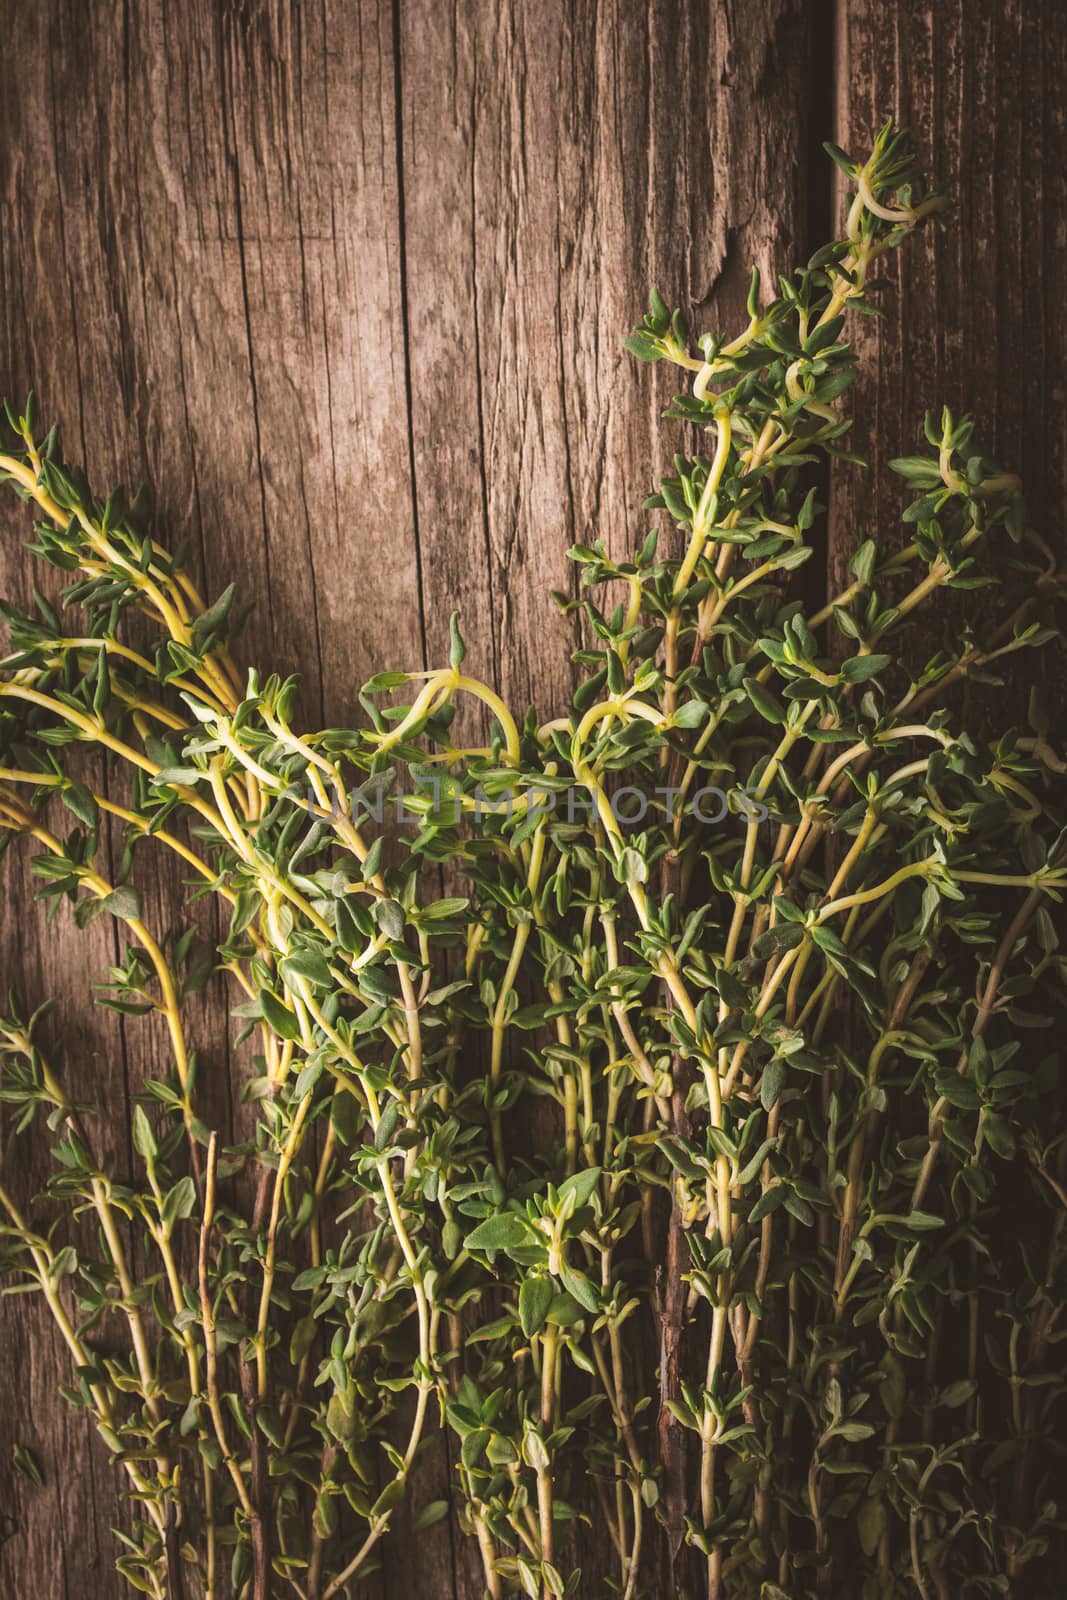 Thyme on the old wooden board by Deniskarpenkov